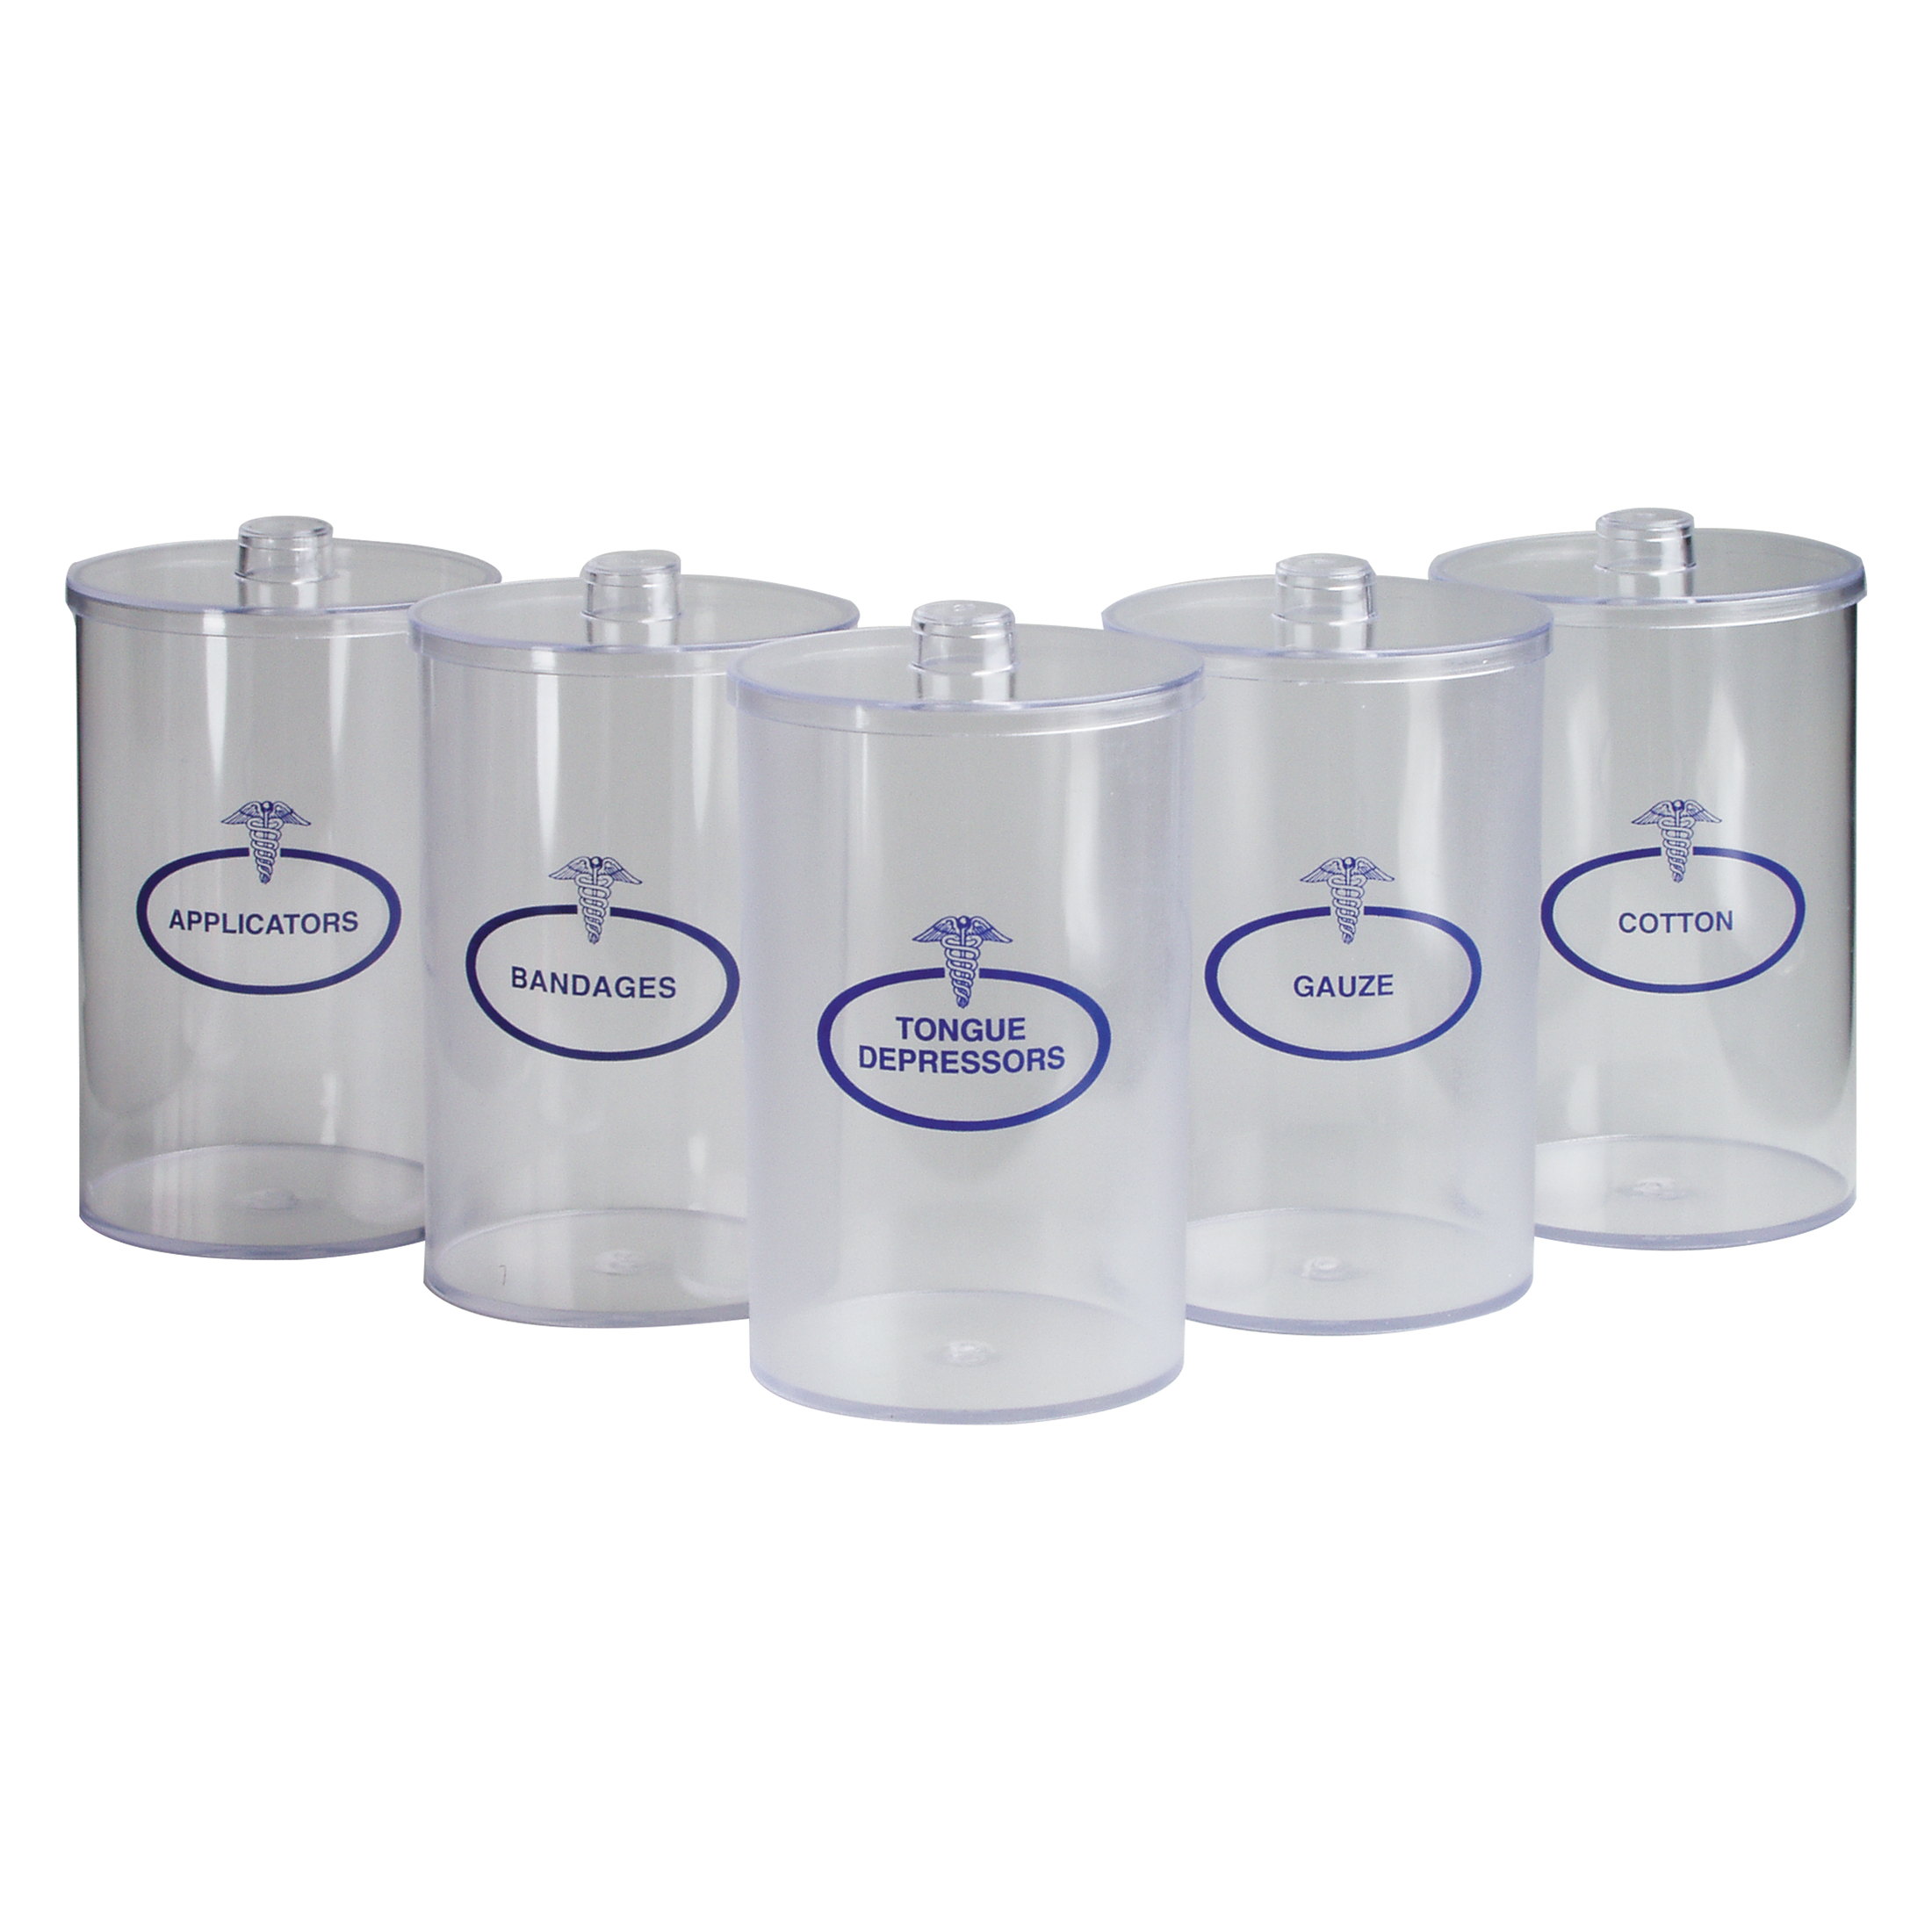 Storage & Jars Products, Supplies and Equipment